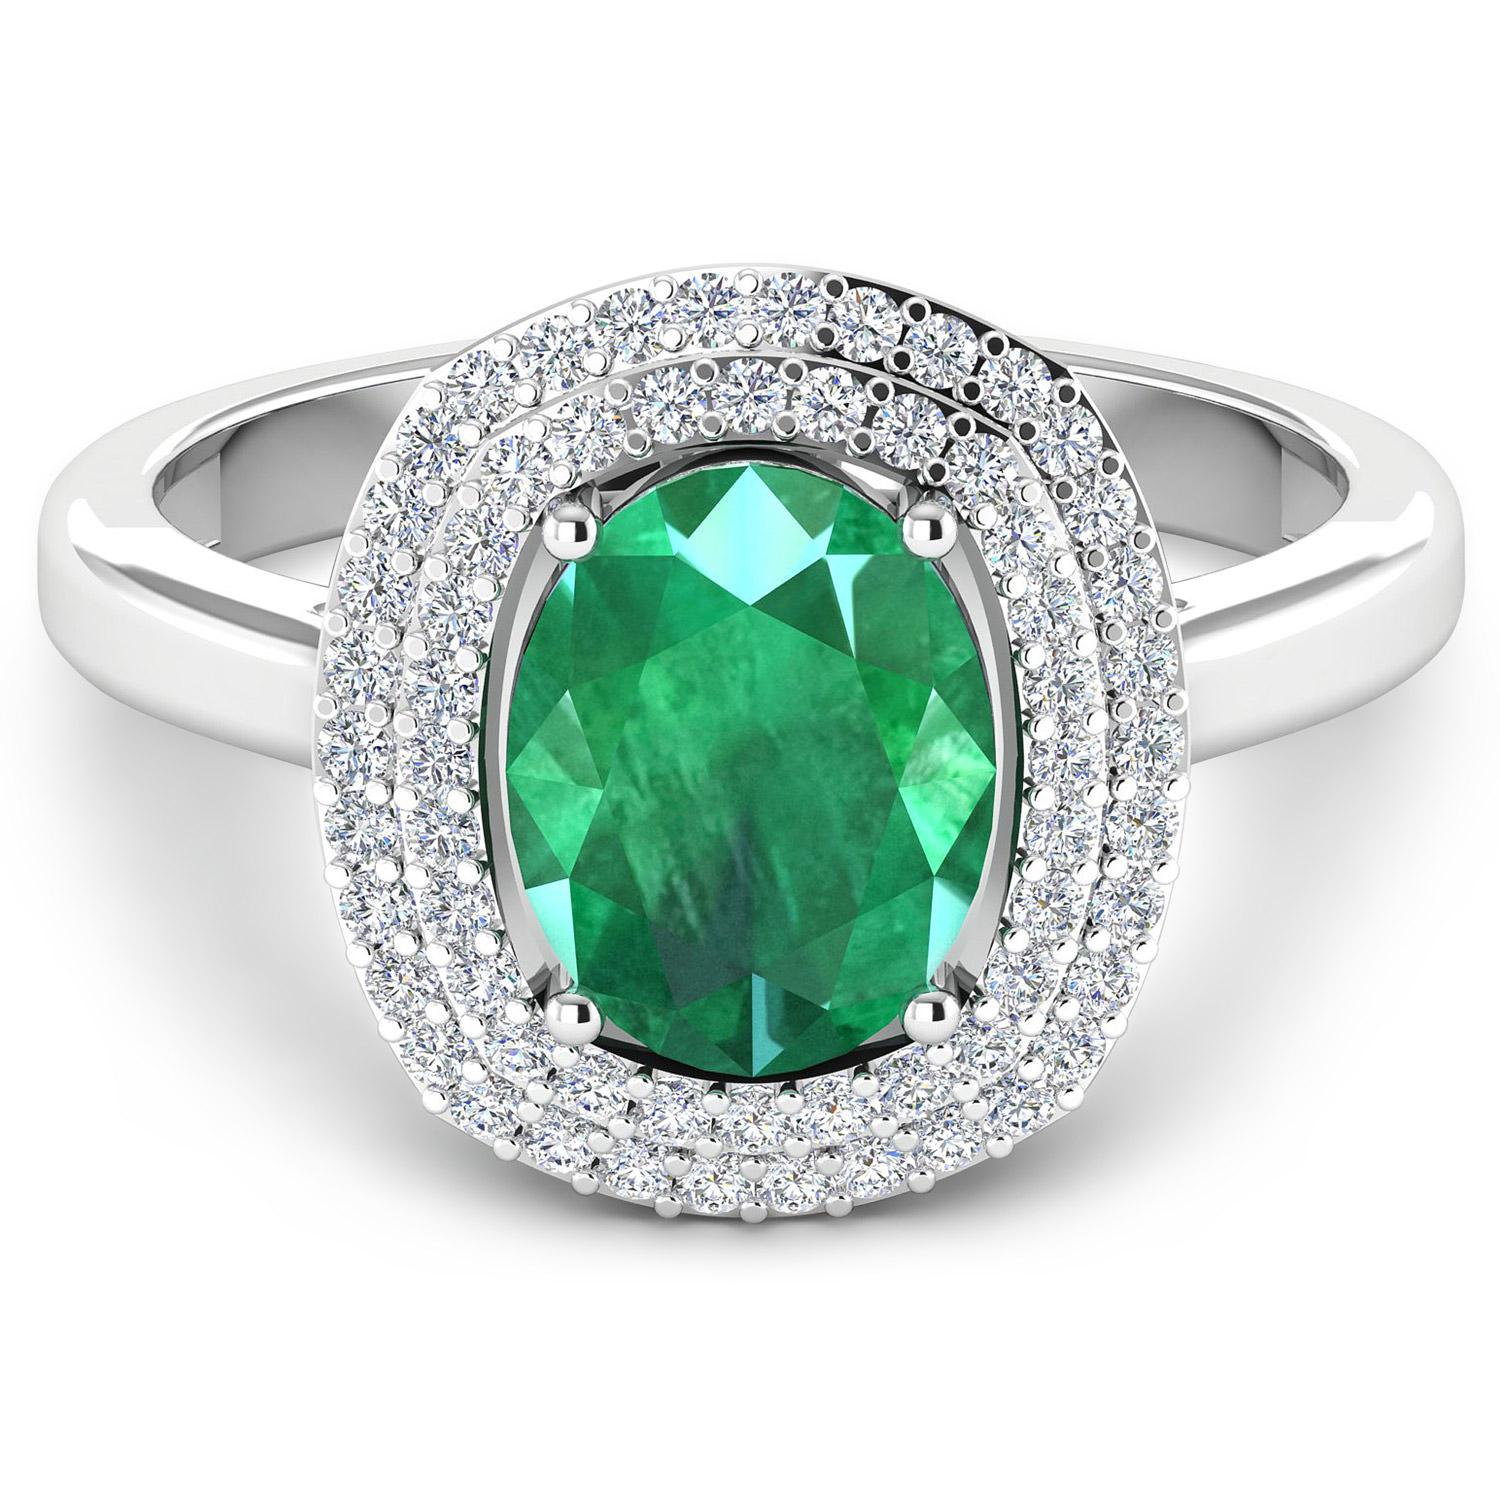 Natural Zambian 1.70 Carat Emerald & Diamond Double Halo Ring 14k White Gold In Excellent Condition For Sale In Laguna Niguel, CA